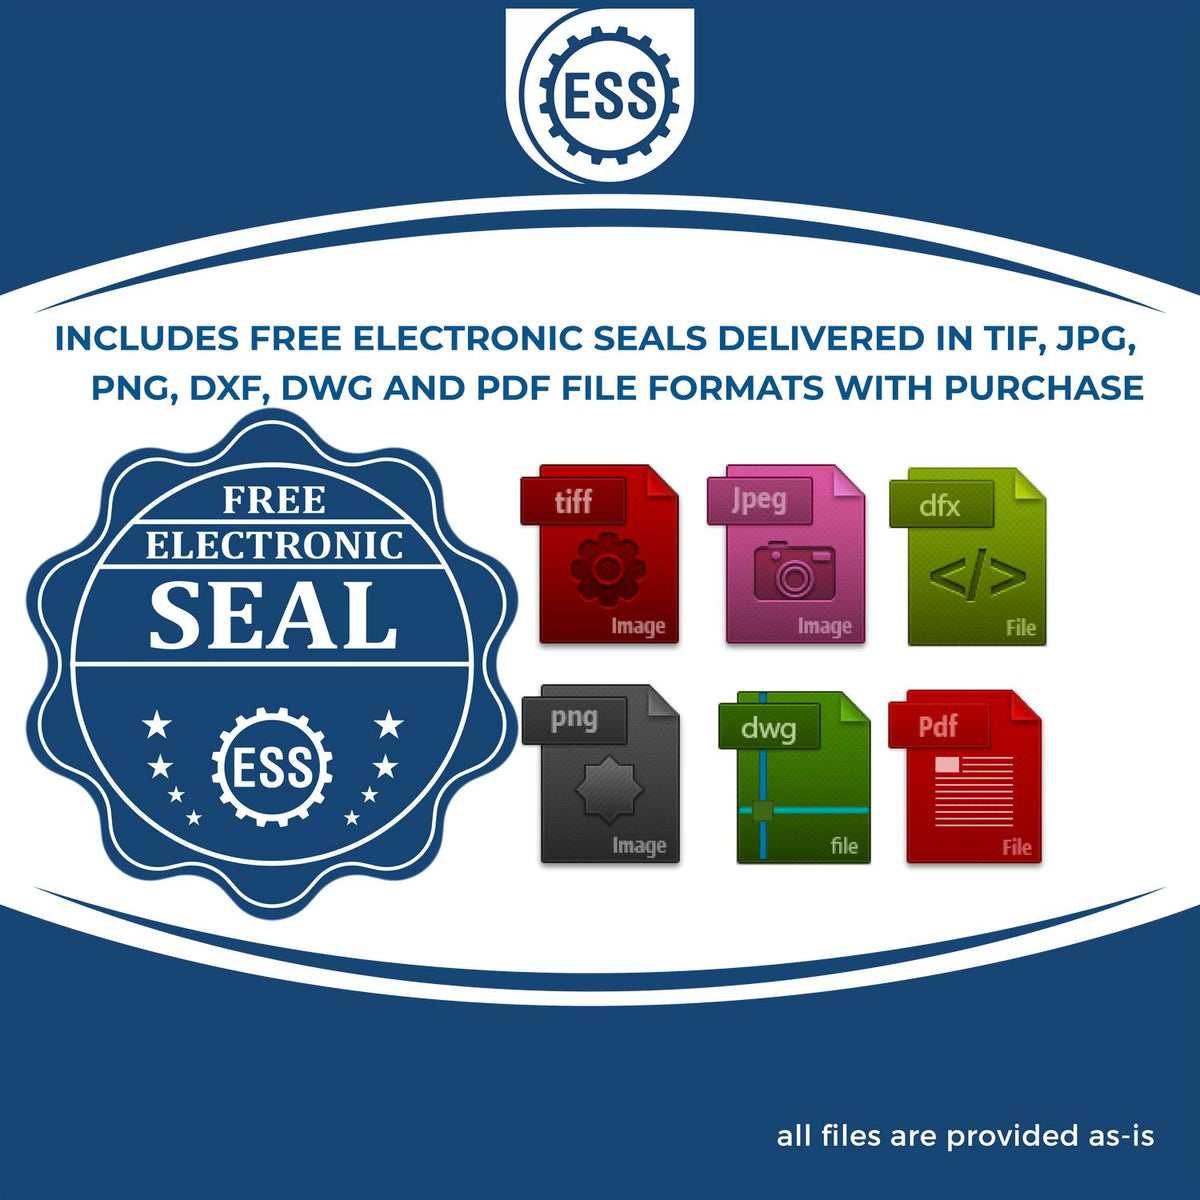 An infographic for the free electronic seal for the Self-Inking Hawaii PE Stamp illustrating the different file type icons such as DXF, DWG, TIF, JPG and PNG.